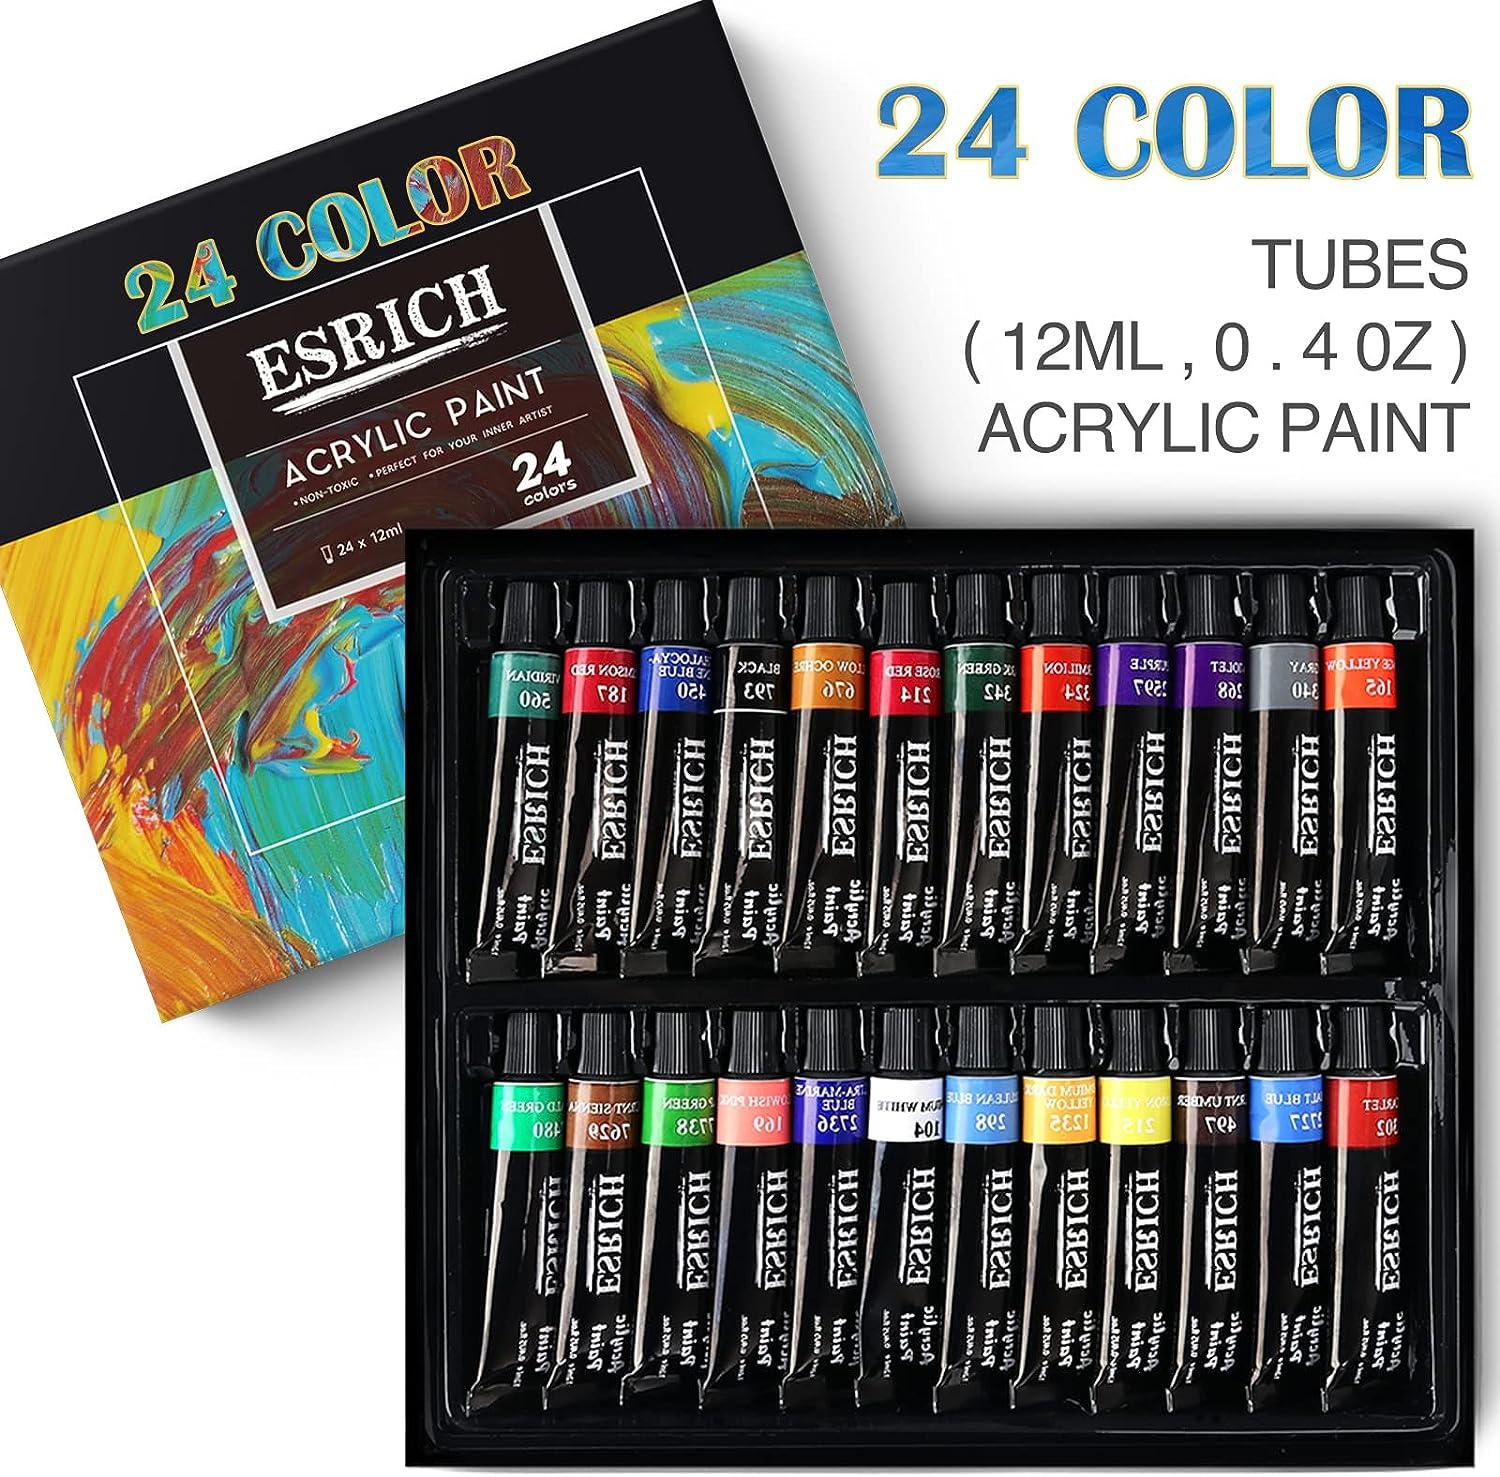 Art Paint Set for Kids, Painting Supplies Kit with 5 Canvas Panels, 8  Brushes, 12 Acrylic Paints, Multi-Function Table Easel, Etc, Premium  Acrylic